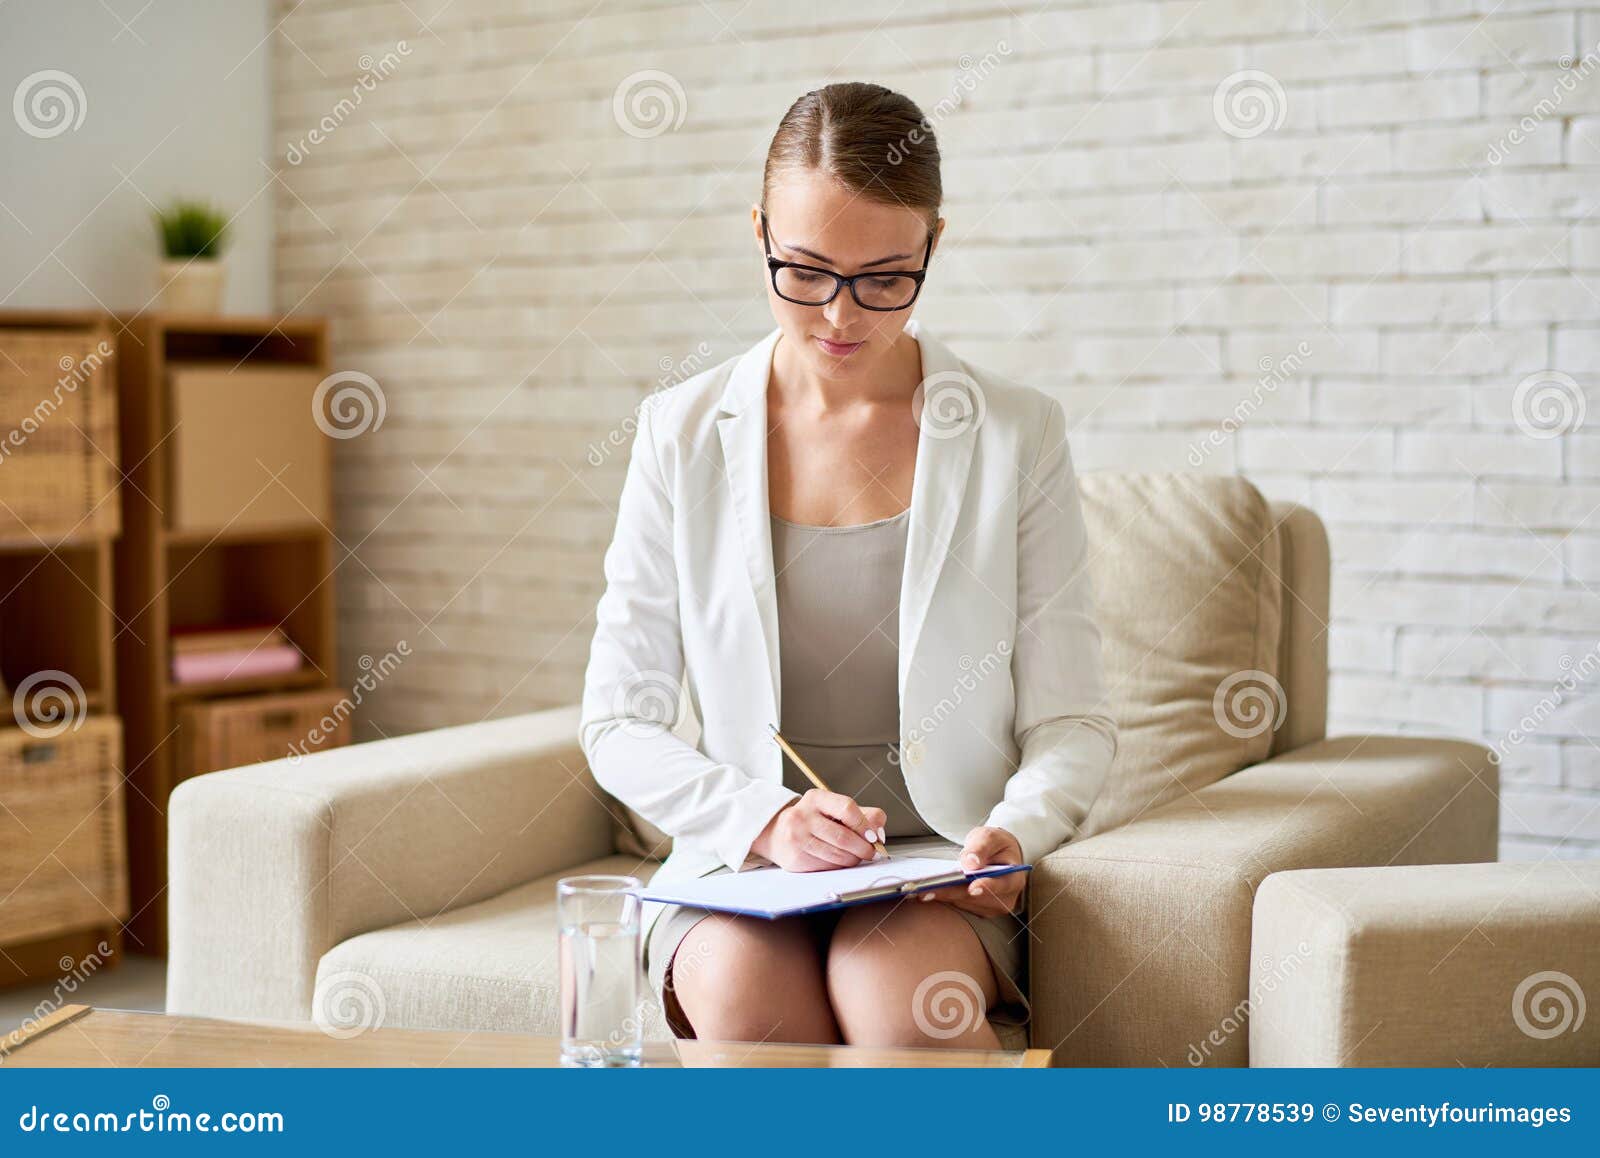 Beautiful Female Psychiatrist Making Notes Stock Image Image Of Mental Therapy 98778539